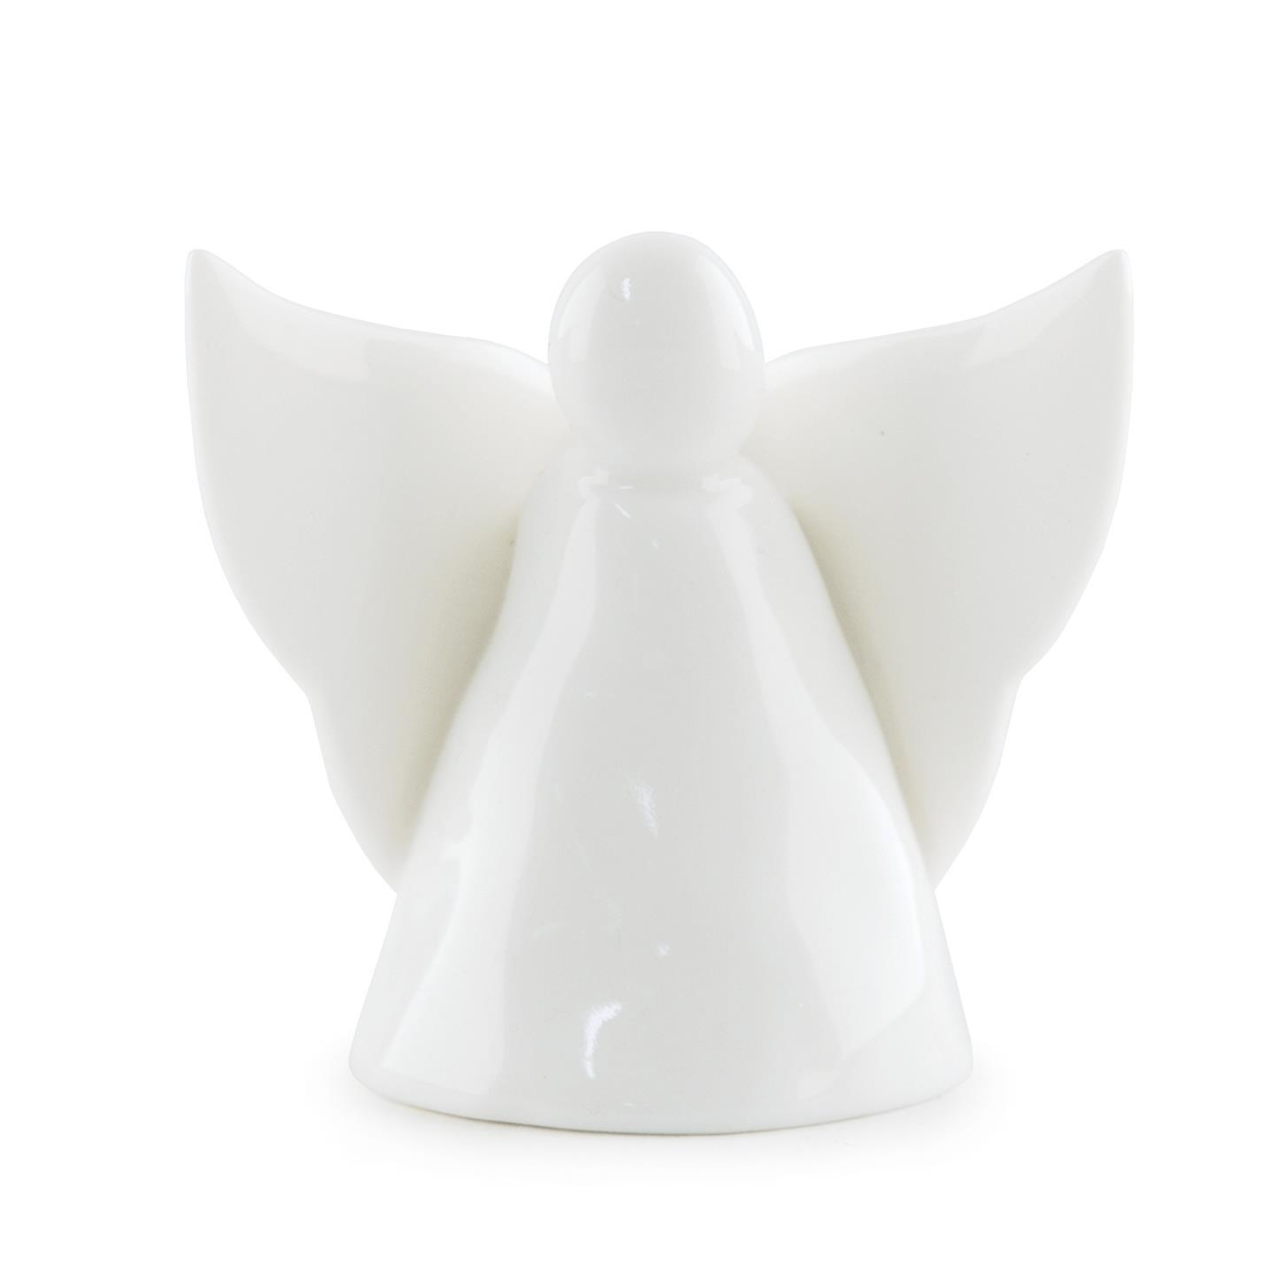 Angel Decorative Sculpture/Vase/Candle Holder in Gift Box